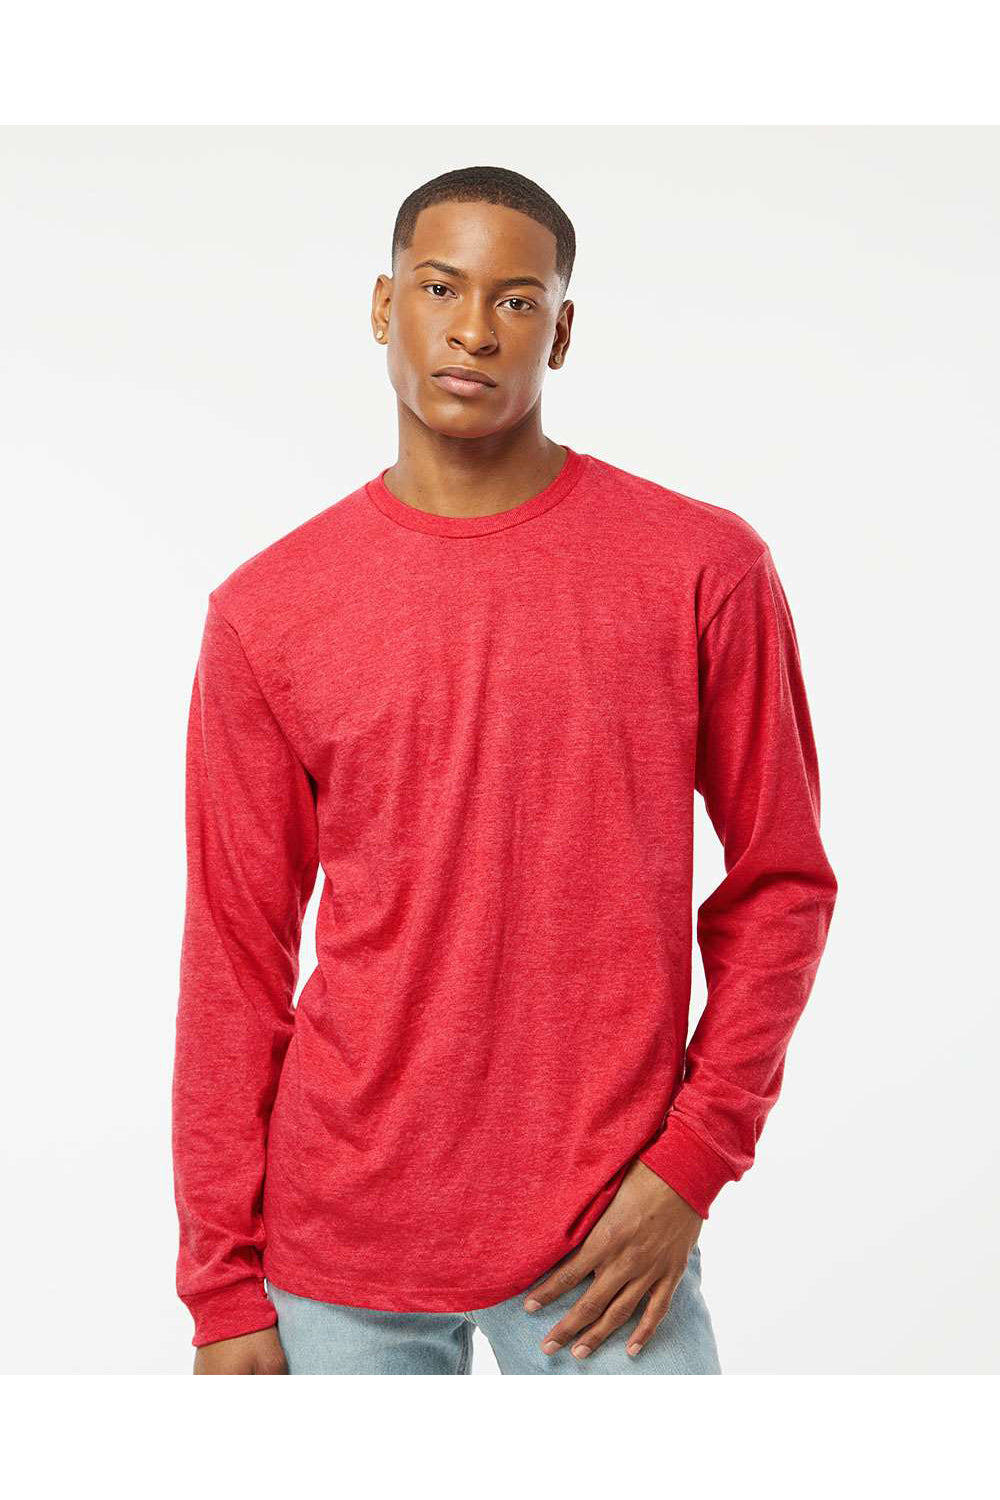 Tultex 291 Mens Jersey Long Sleeve Crewneck T-Shirt Heather Red Model Front